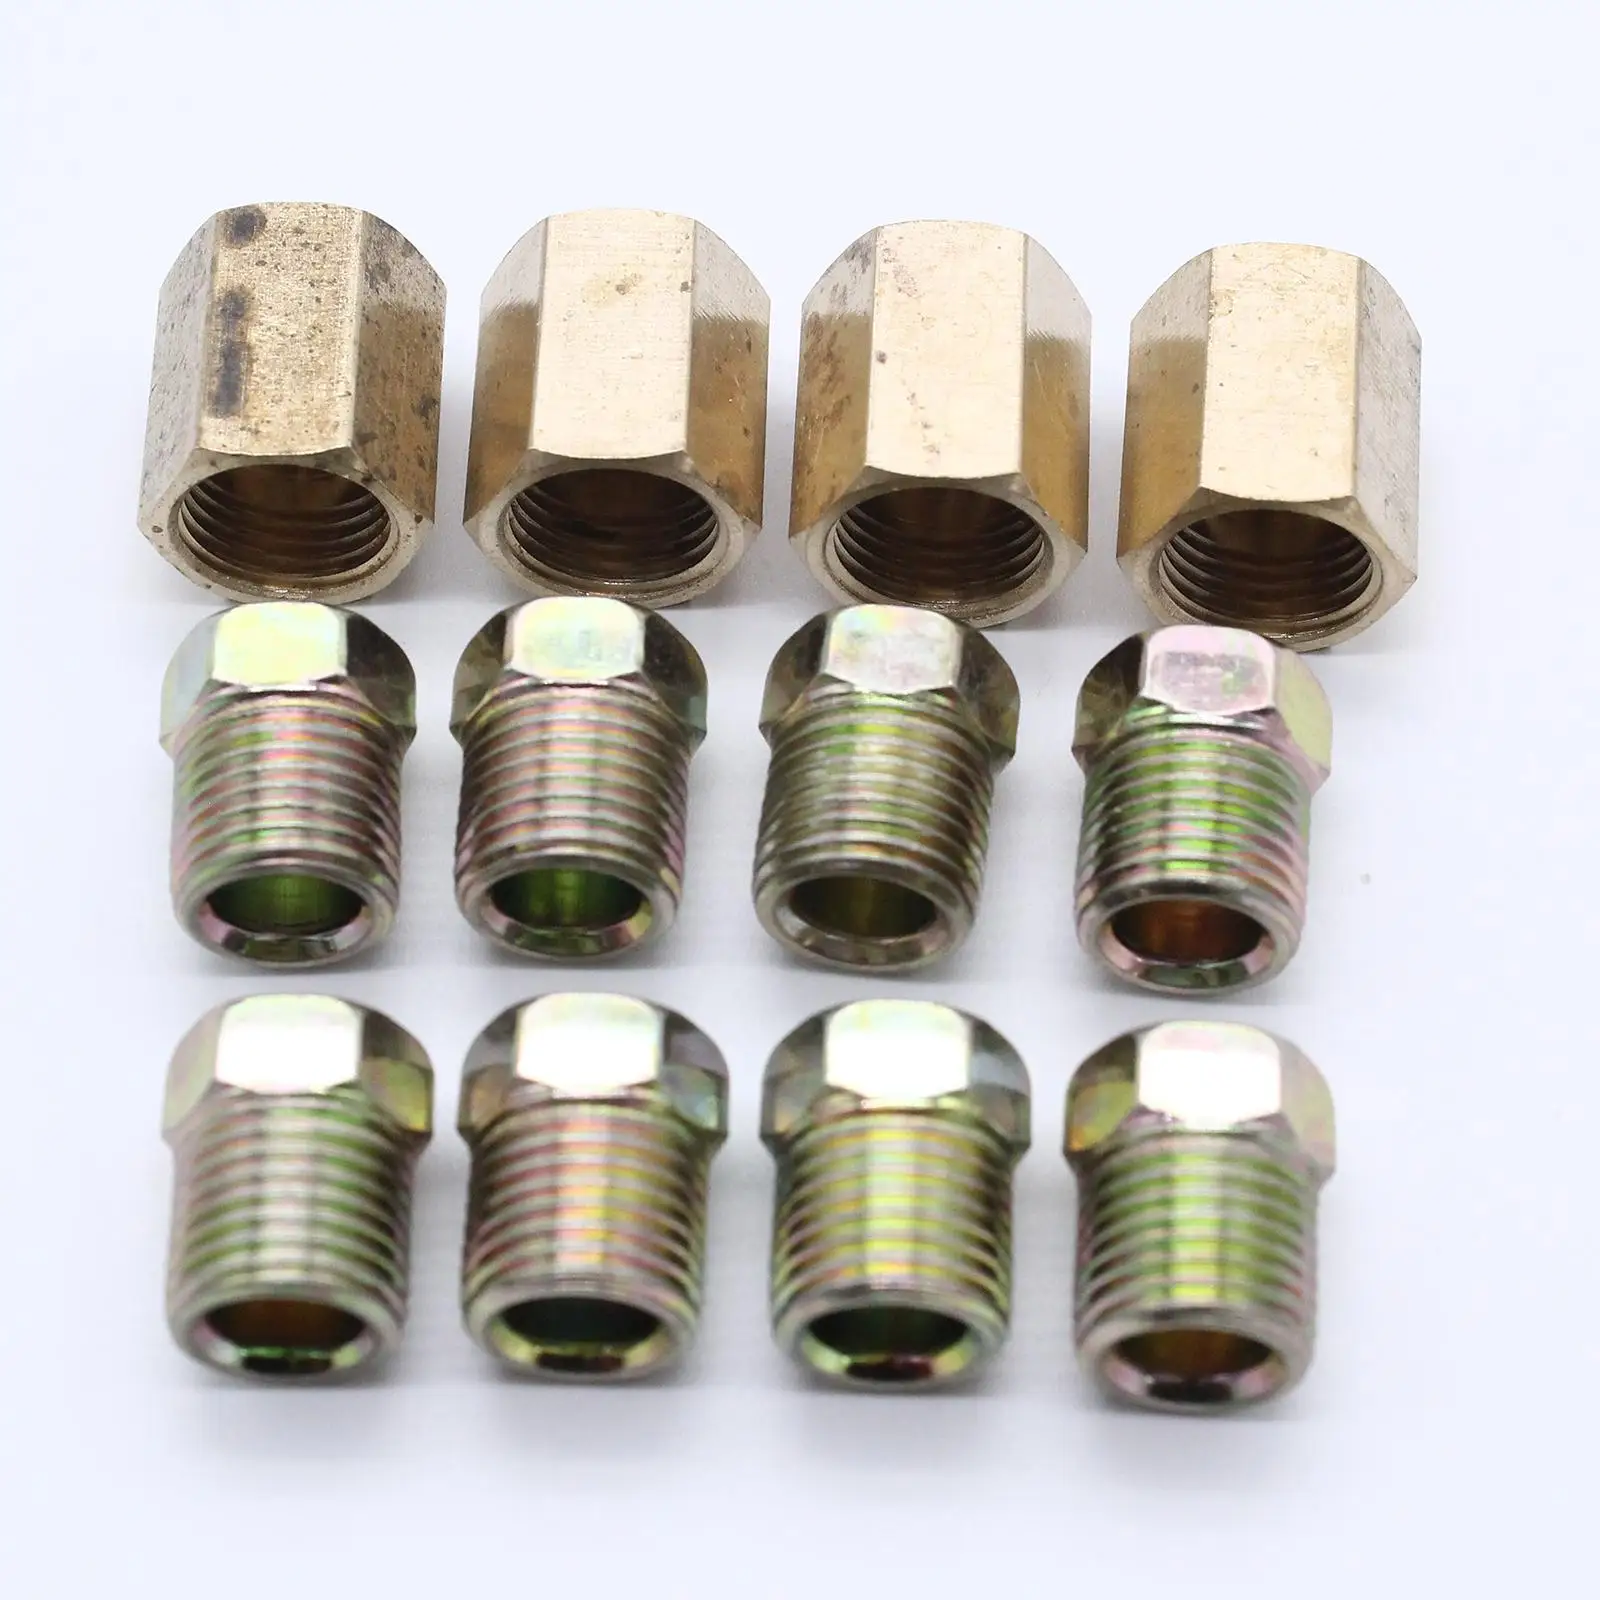 12-Pack 1/4 inch Brake Line Connector Fittings Brass Unions Set Threads